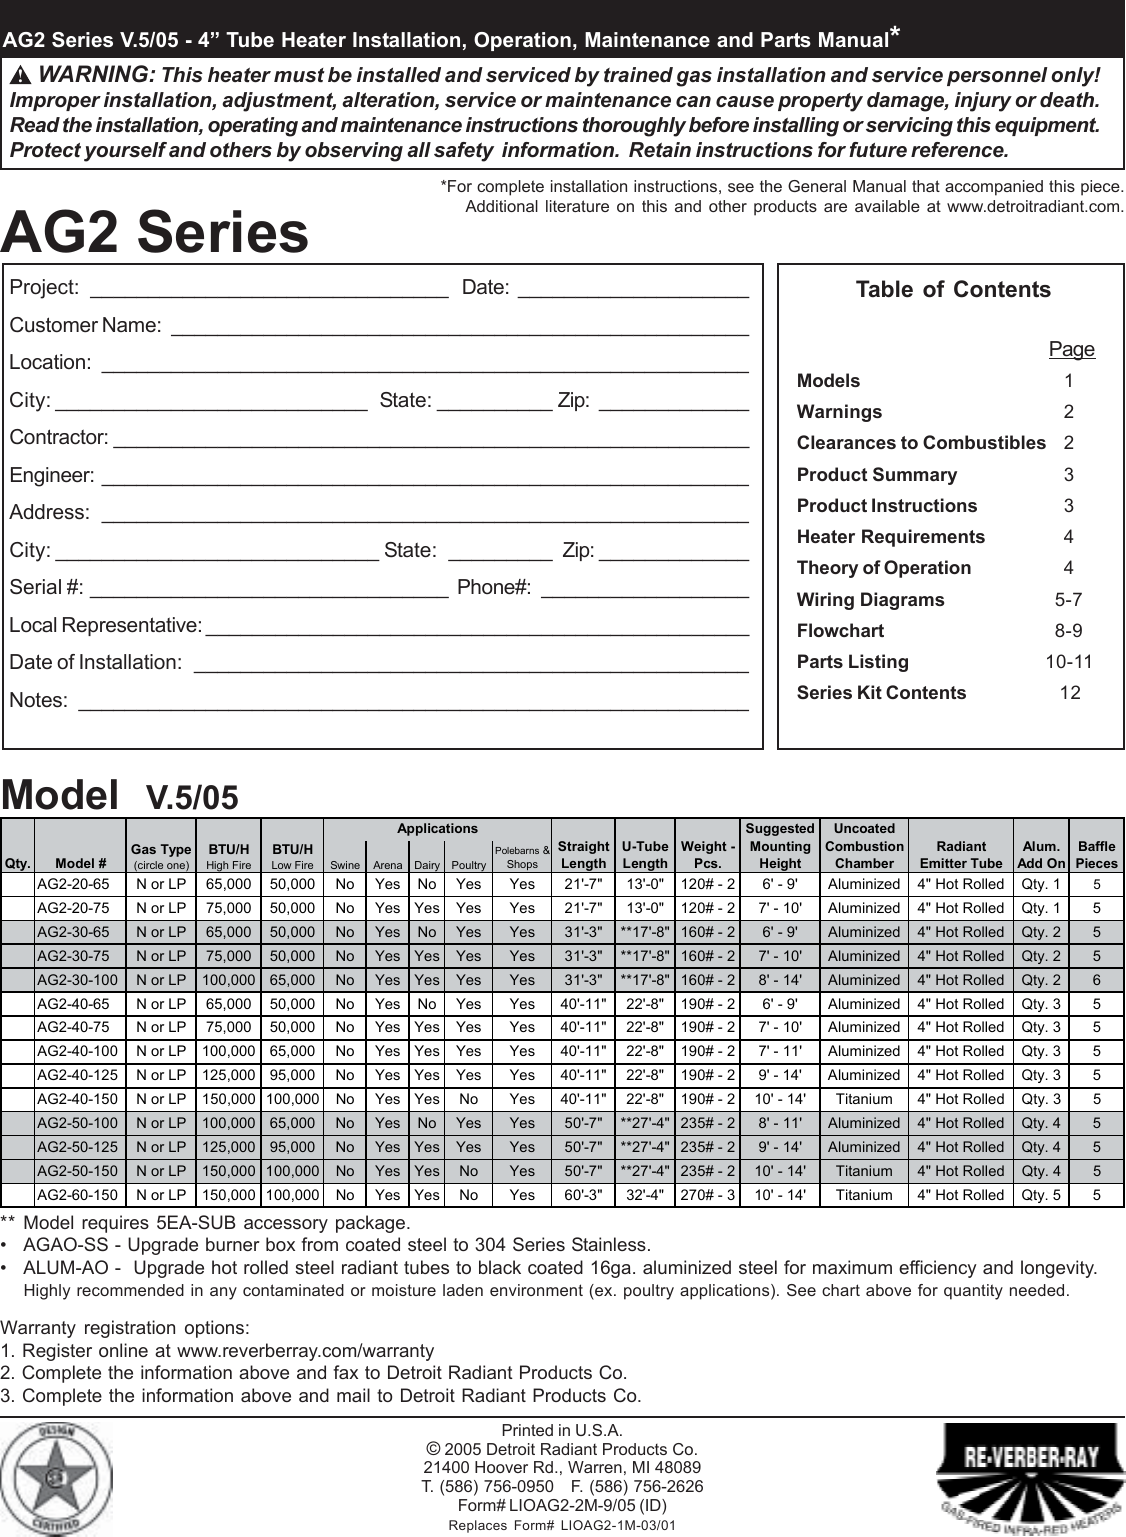 Page 1 of 12 - Detroit-Electric Detroit-Electric-Detroit-Electric-Gas-Heater-V-5-05-Users-Manual- AG-2 Insert 9-03  Detroit-electric-detroit-electric-gas-heater-v-5-05-users-manual